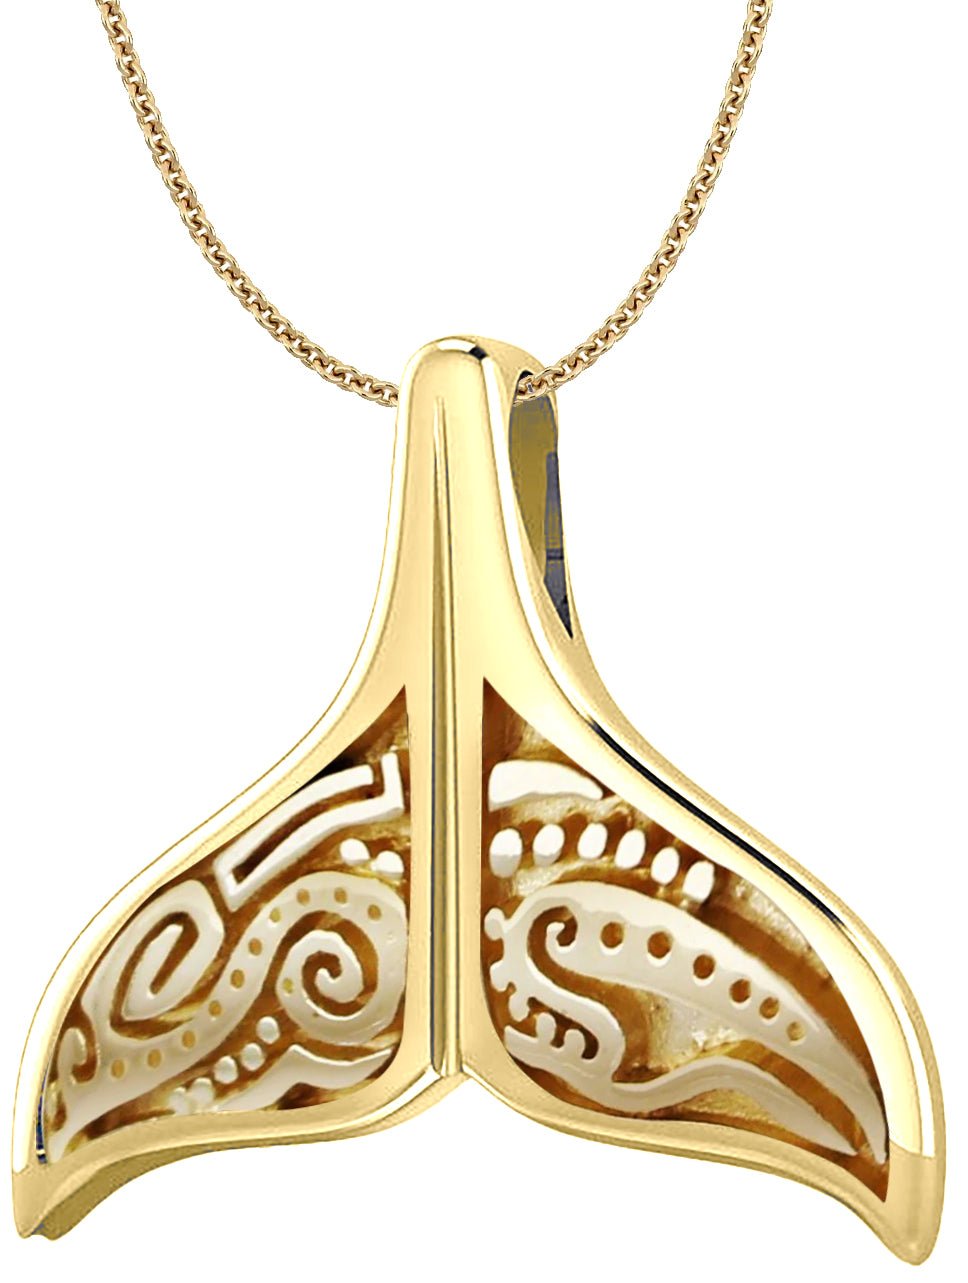 Solid 14k Yellow Gold Aboriginal Whale Tail Aquatic Charm Pendant Necklace - US Jewels